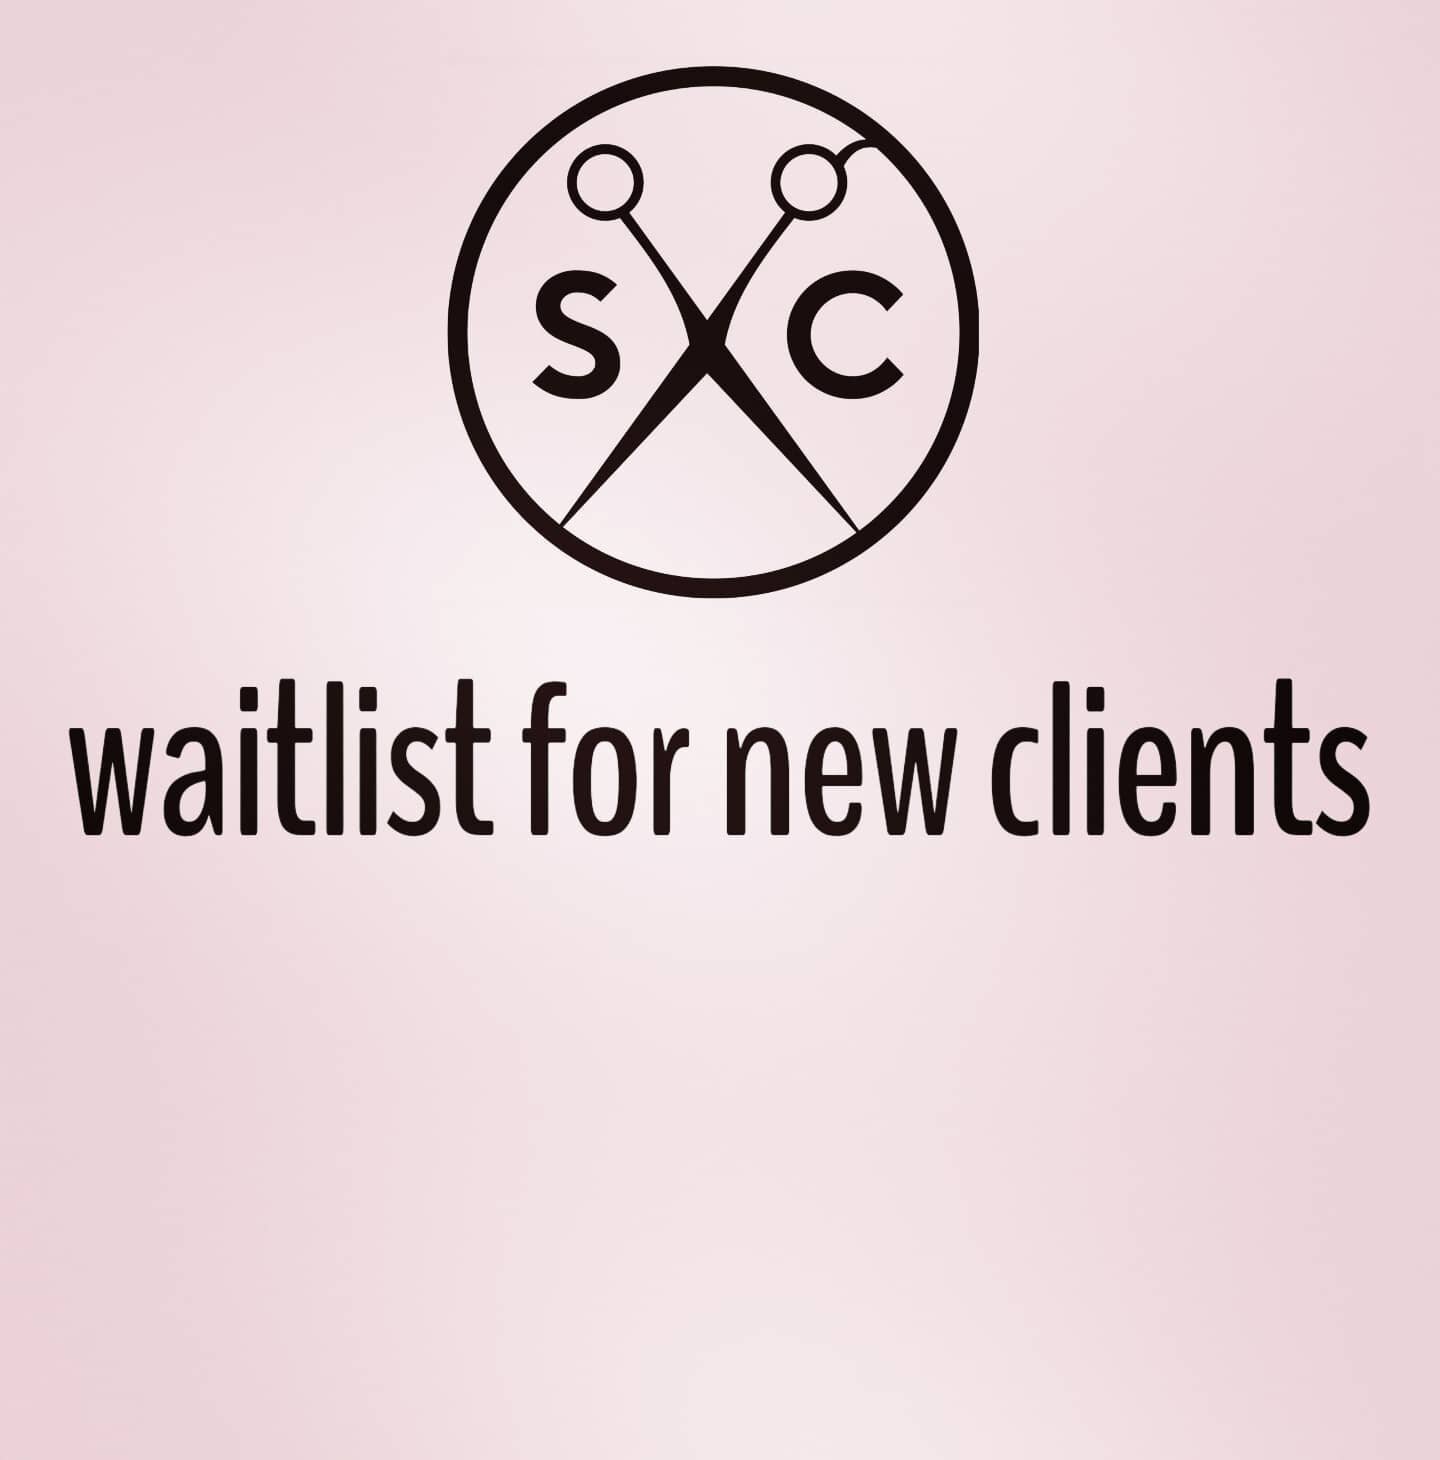 We are currently on a wait list for all new clients, our books are full! We will take names, numbers and your availability, and as things open up we will contact people asap! Thank you for your support! 💖
#waitlisted